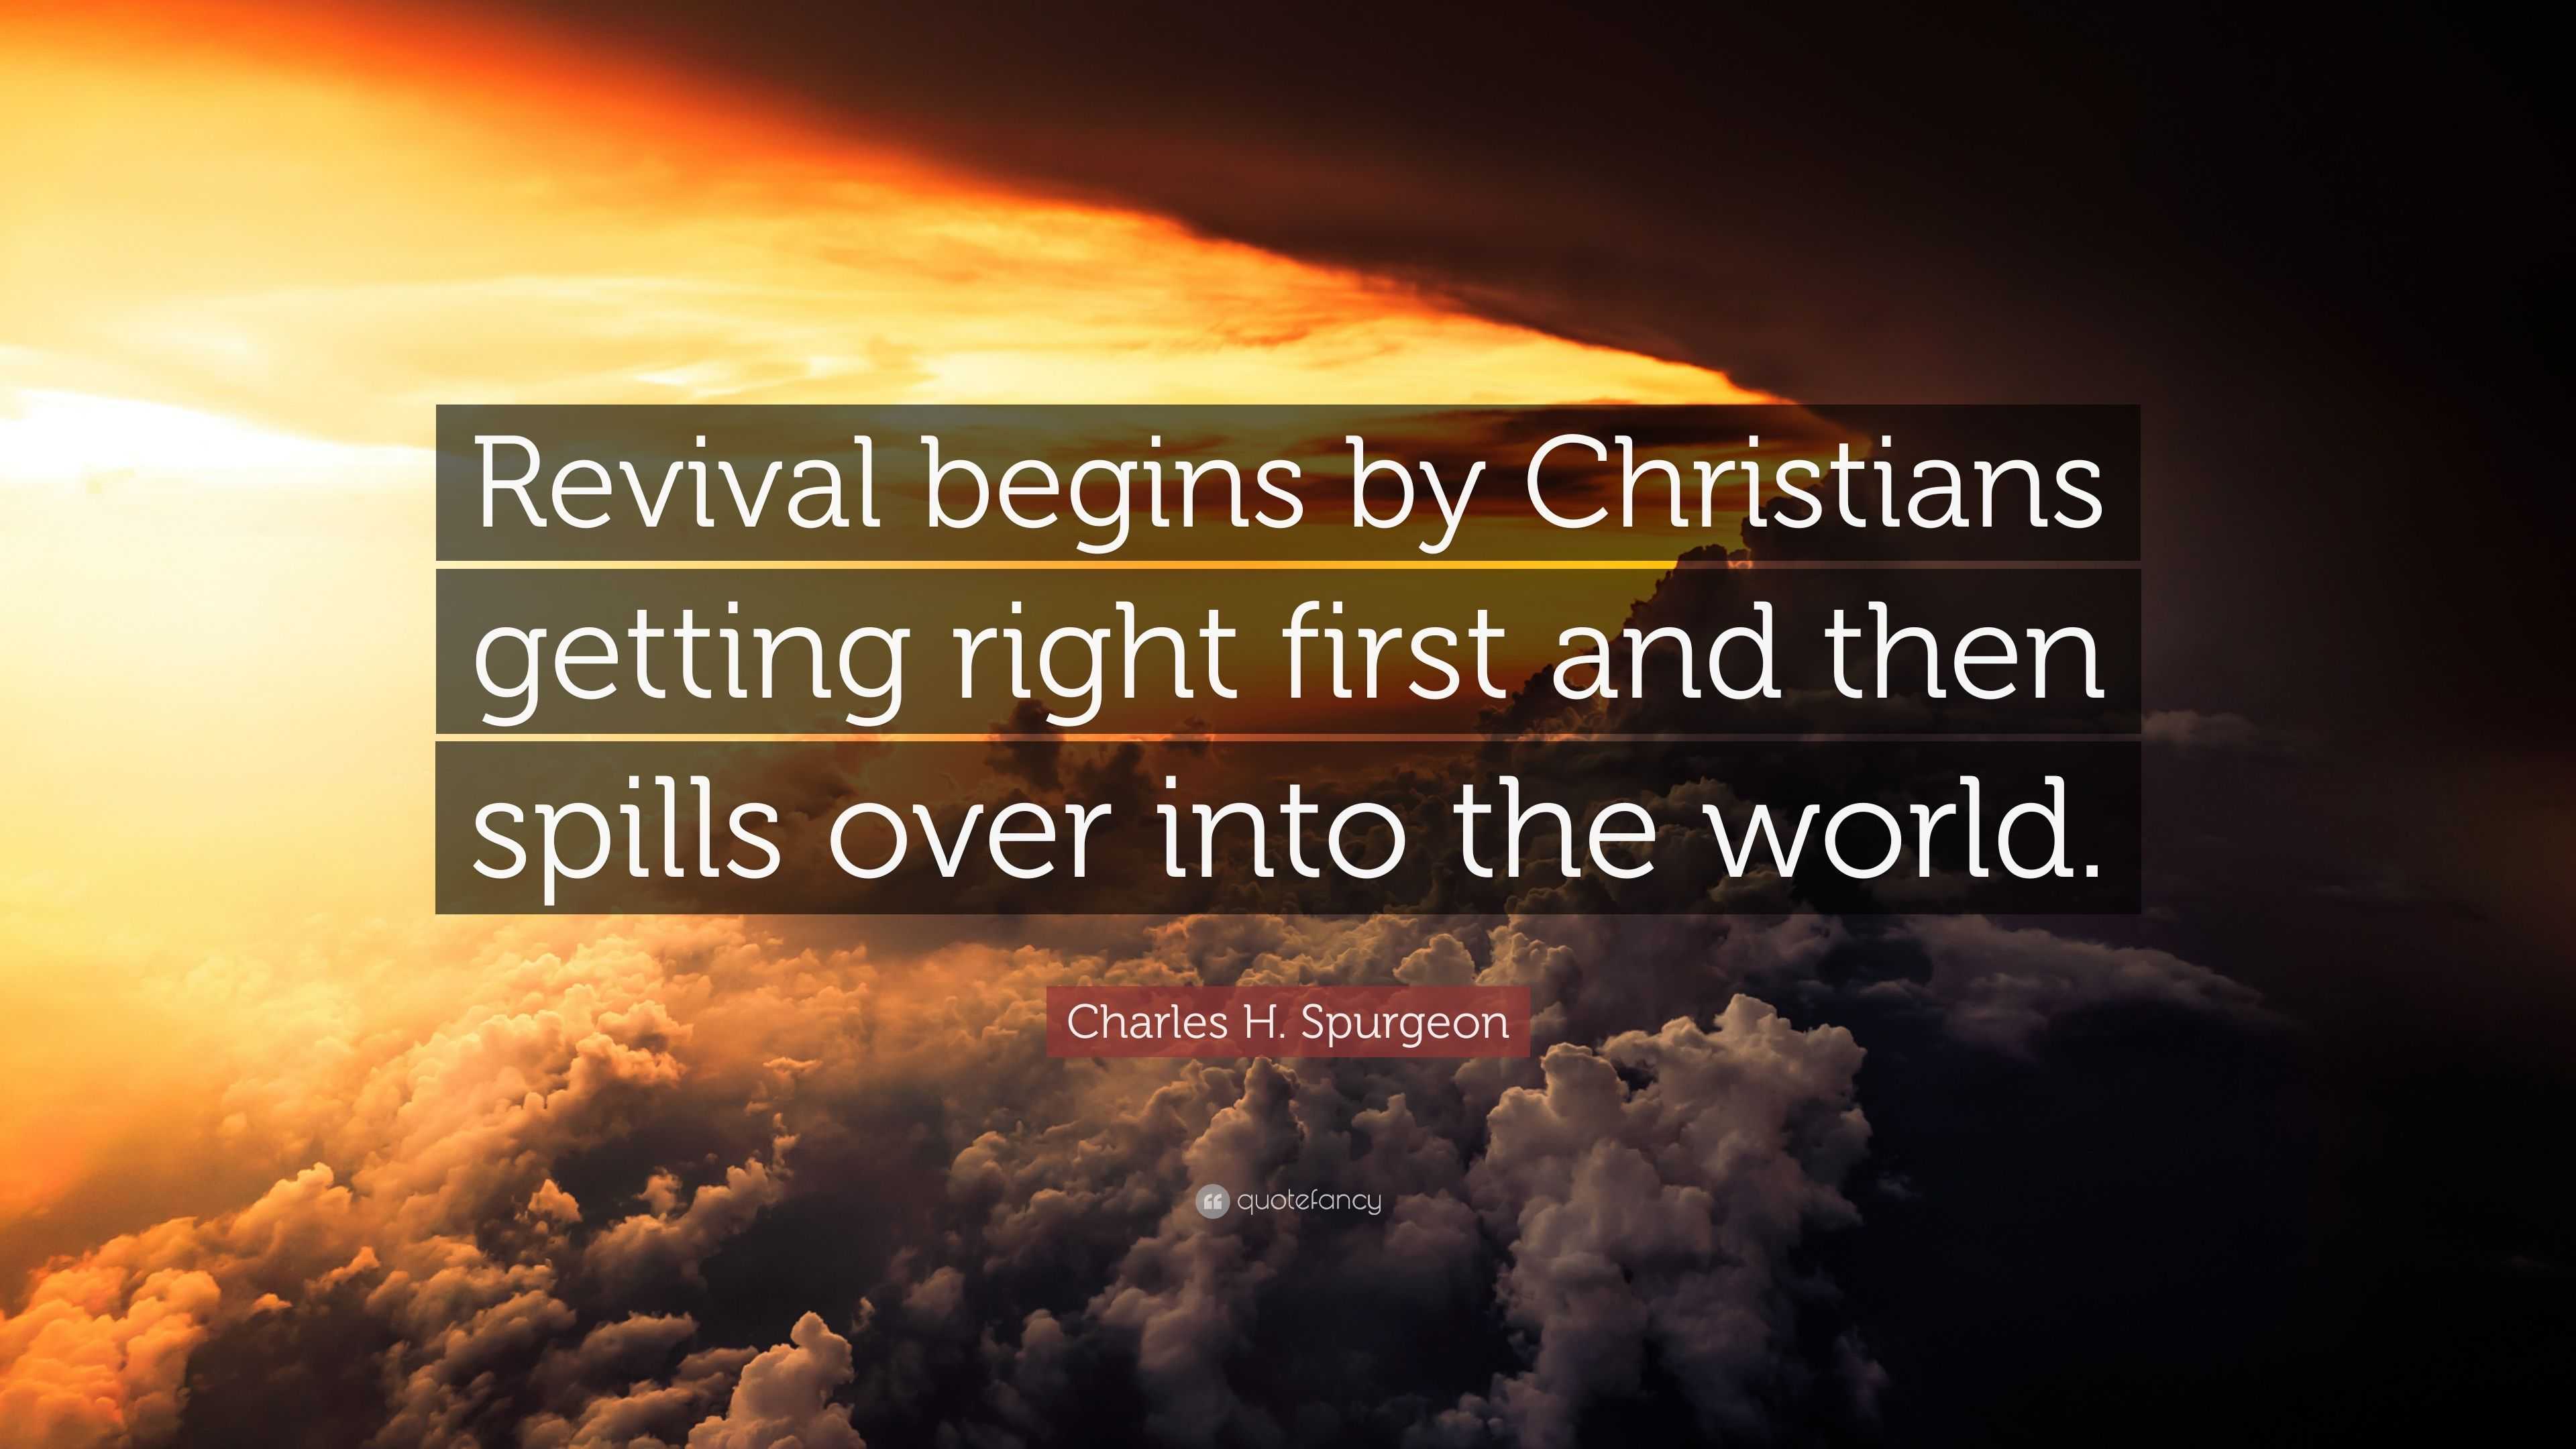 Charles H. Spurgeon Quote “Revival begins by Christians getting right